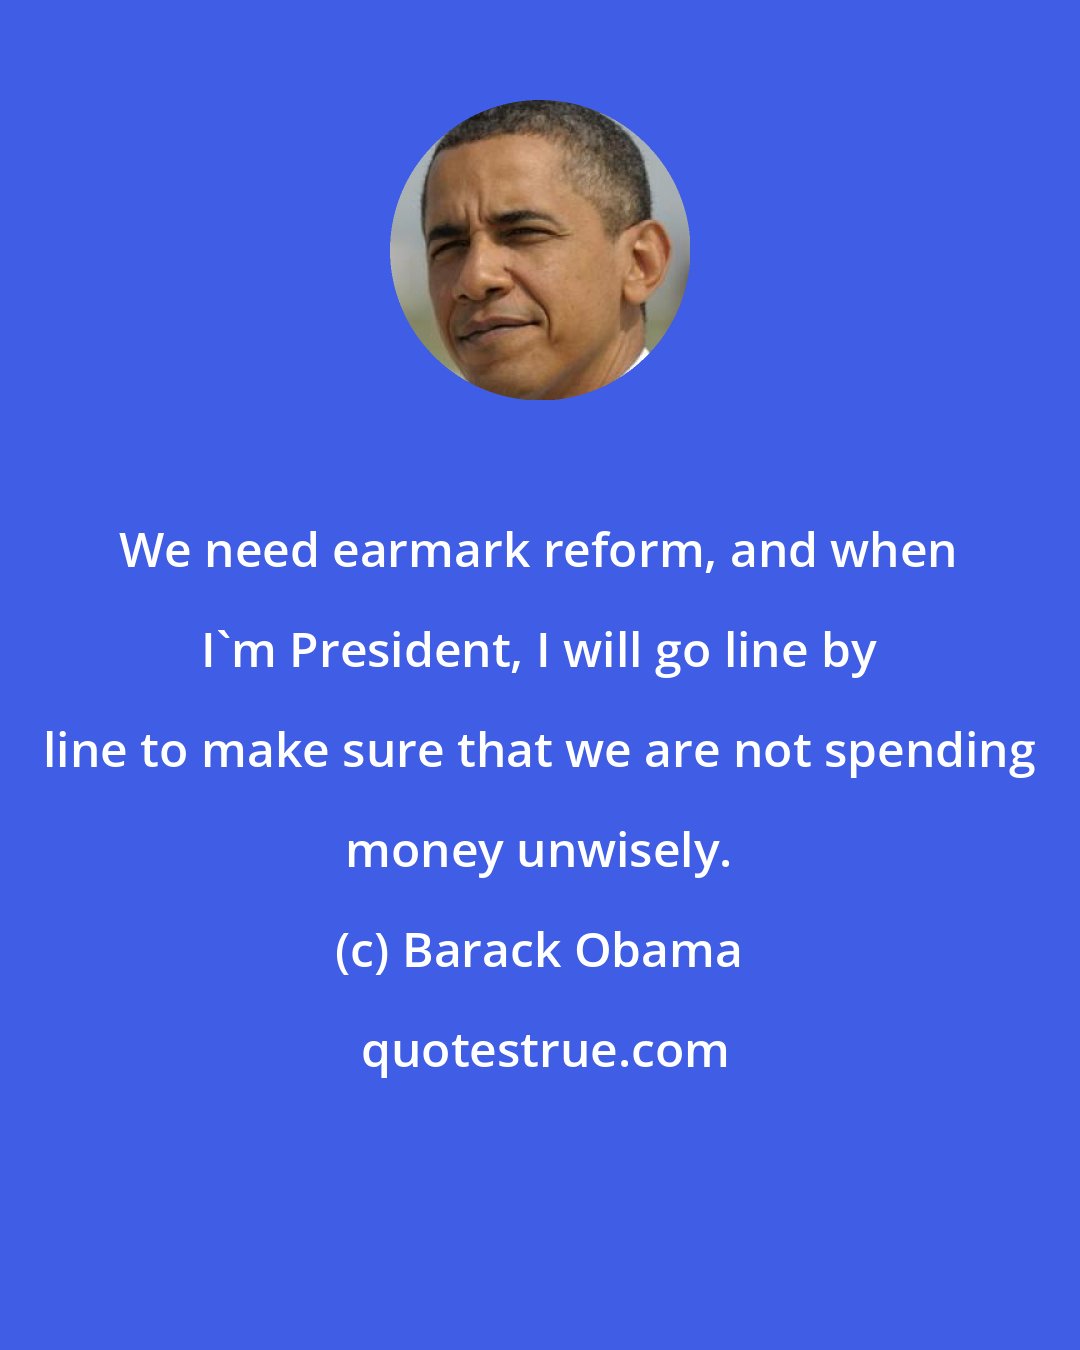 Barack Obama: We need earmark reform, and when I'm President, I will go line by line to make sure that we are not spending money unwisely.